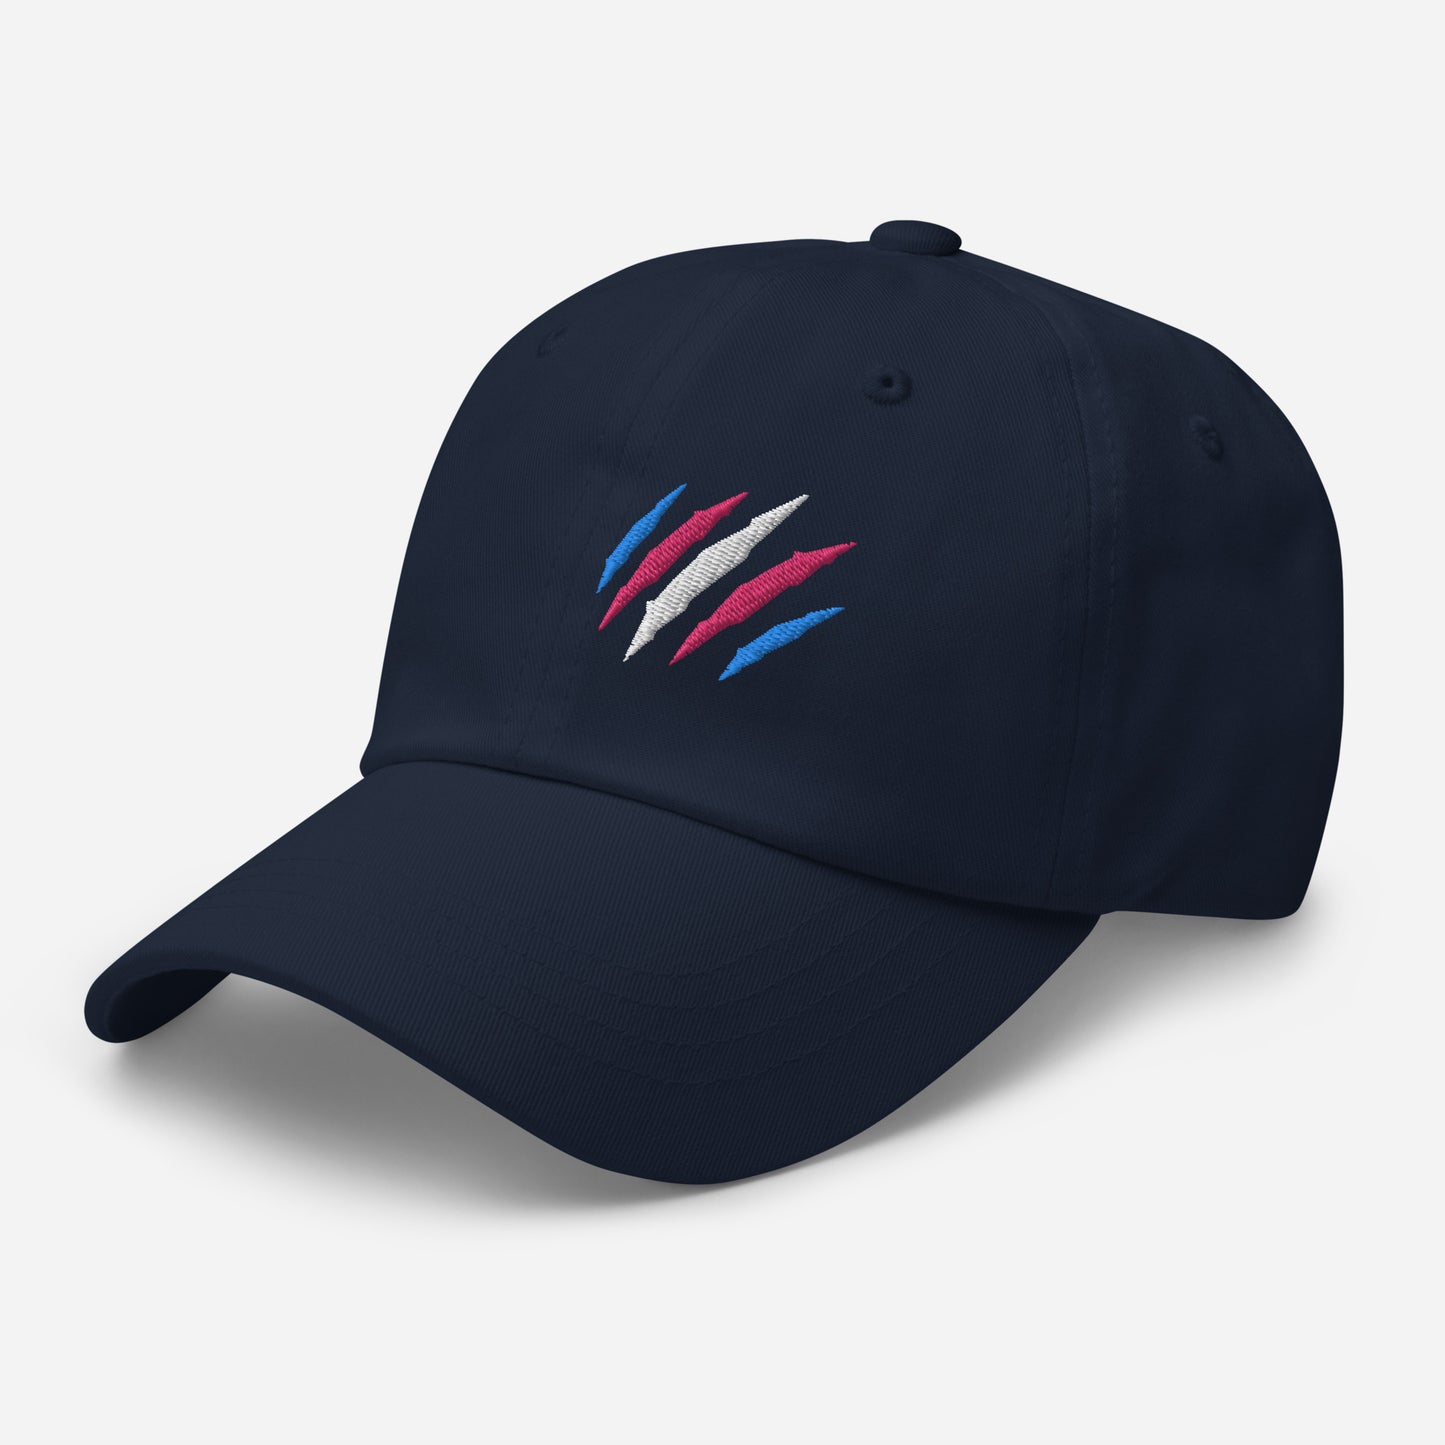 Navy baseball hat featuring transgender pride scratch mark embroidery with a low profile, adjustable strap.